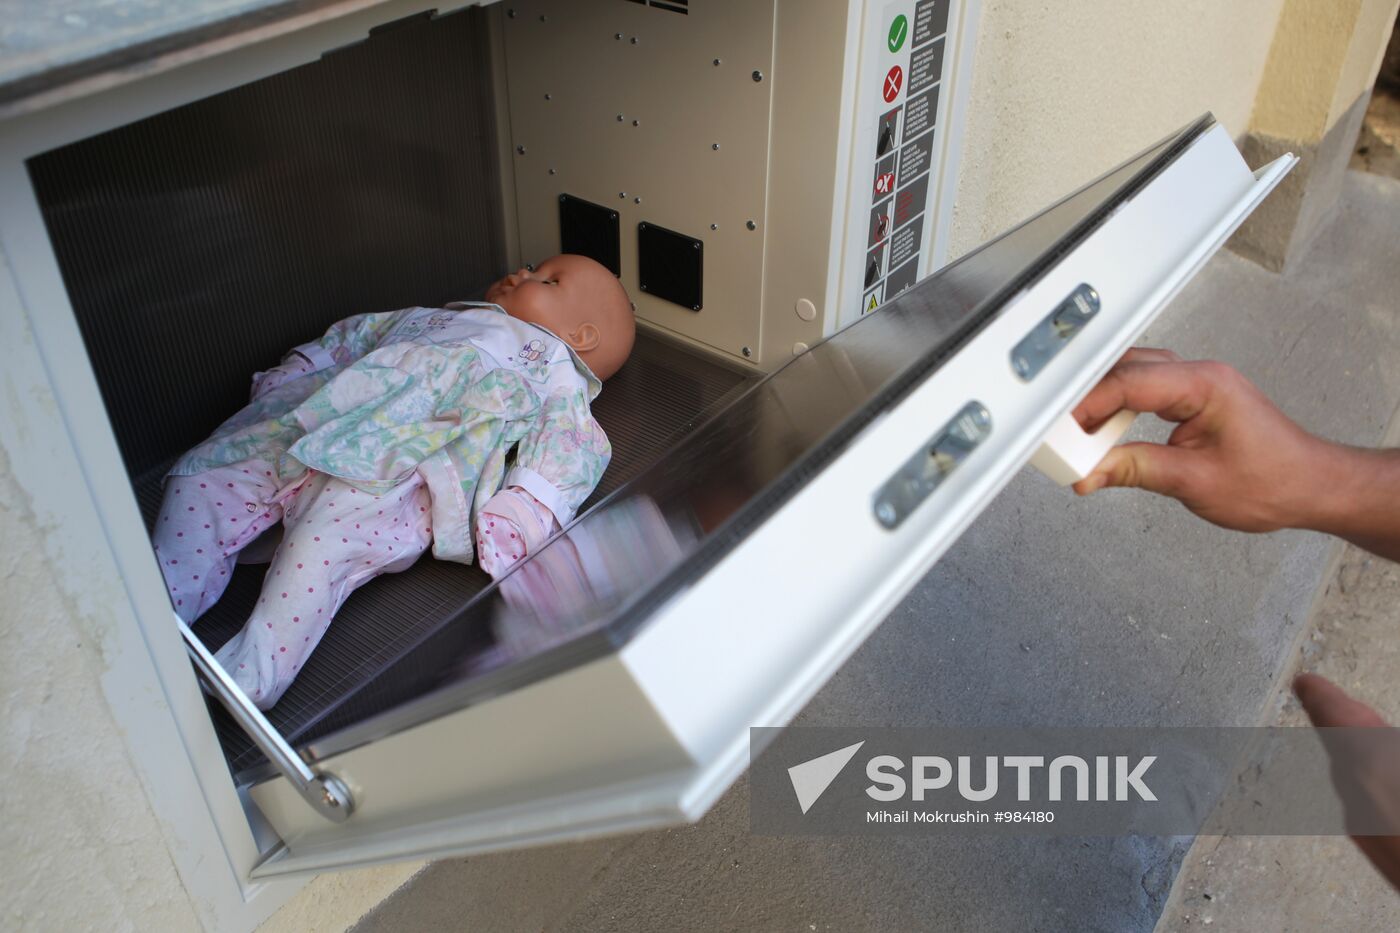 Russia's first baby box for unwanted newborns in Sochi